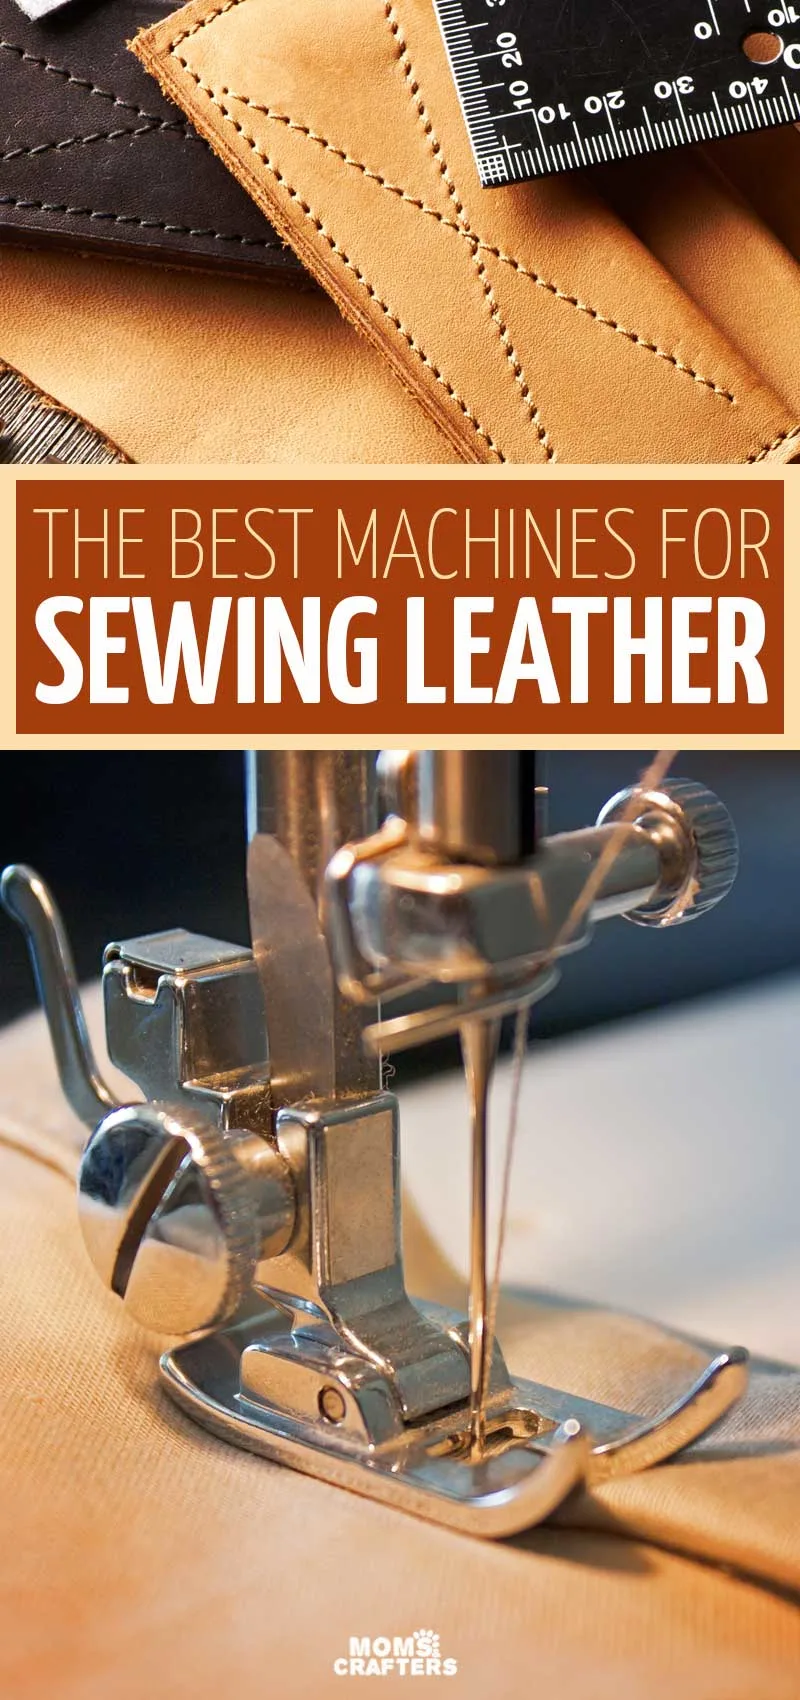 Click for sewing tips and the best machine for sewing leather! Learn how to sew leather crafts using a sewing machine, which needles you need, and more tips for sewing leather with a sewing machine. 